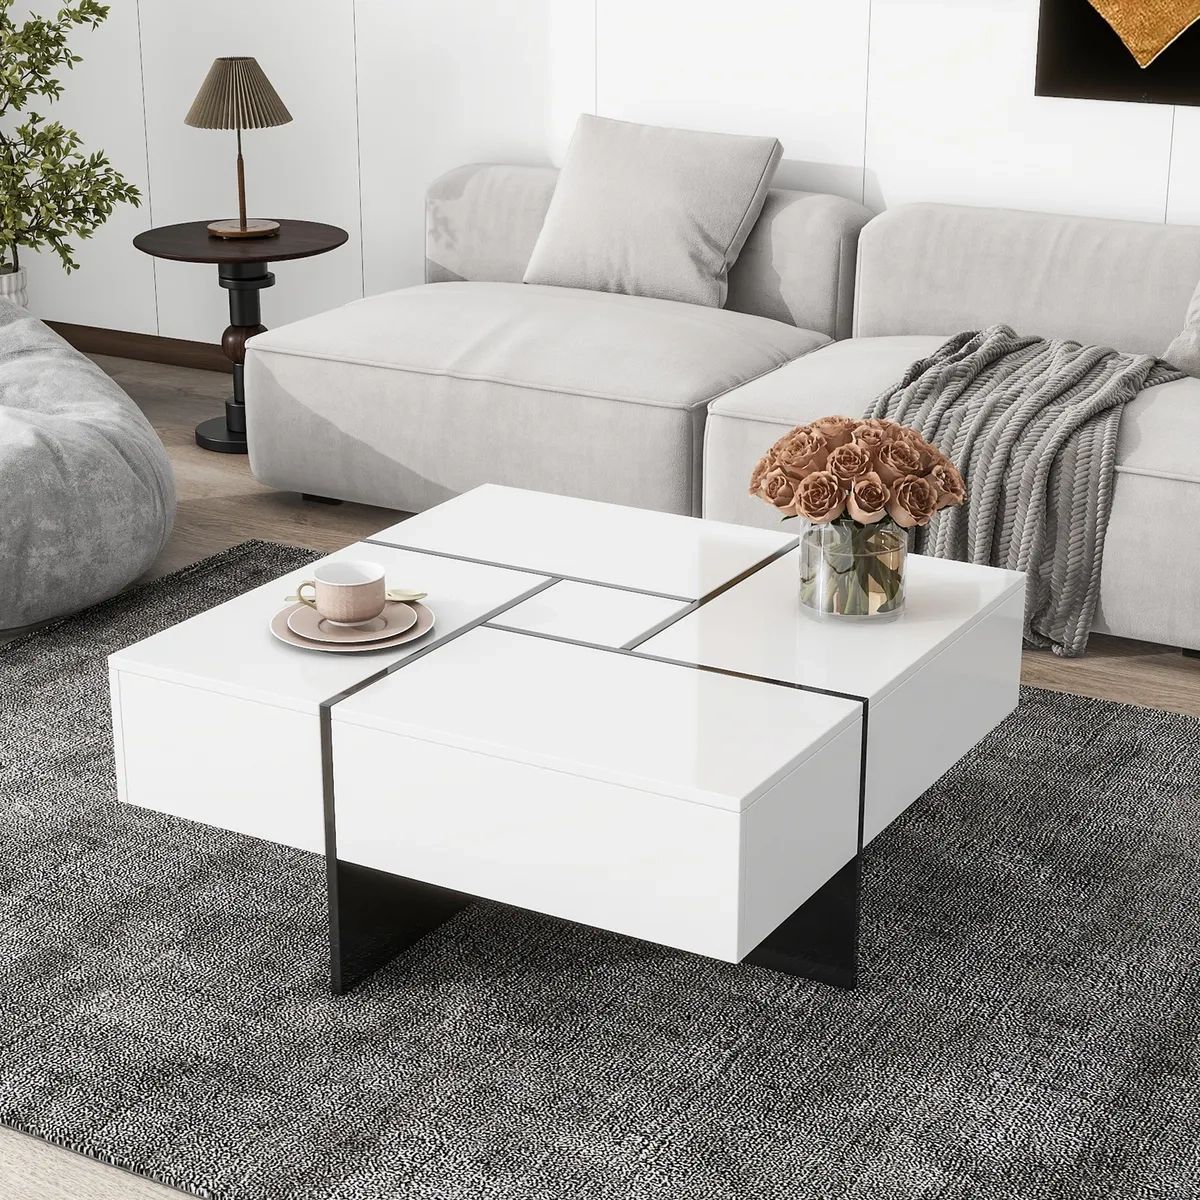 Merax Modern Square Coffee Table Extendable Sliding W/Hidden Storage End  Table | Ebay Inside Modern Coffee Tables With Hidden Storage Compartments (Photo 3 of 15)